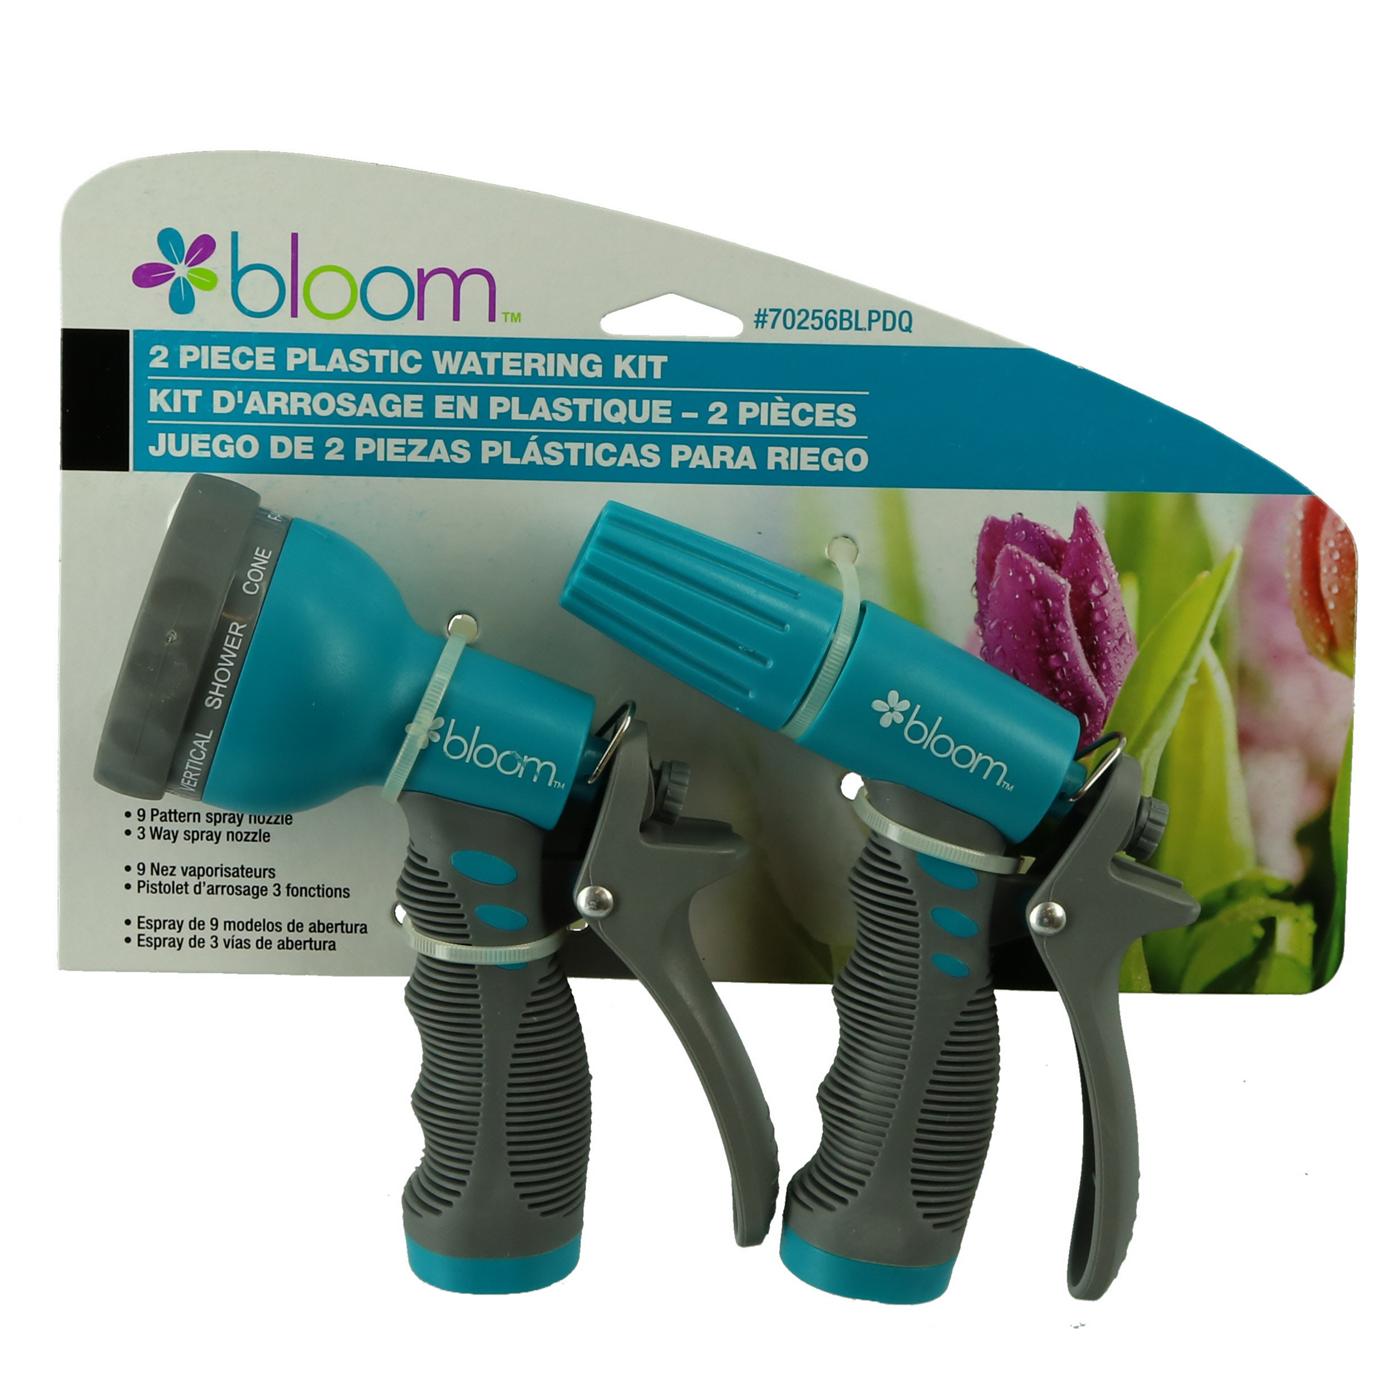 Bloom Plastic Watering Nozzle Kit, Colors May Vary; image 1 of 3